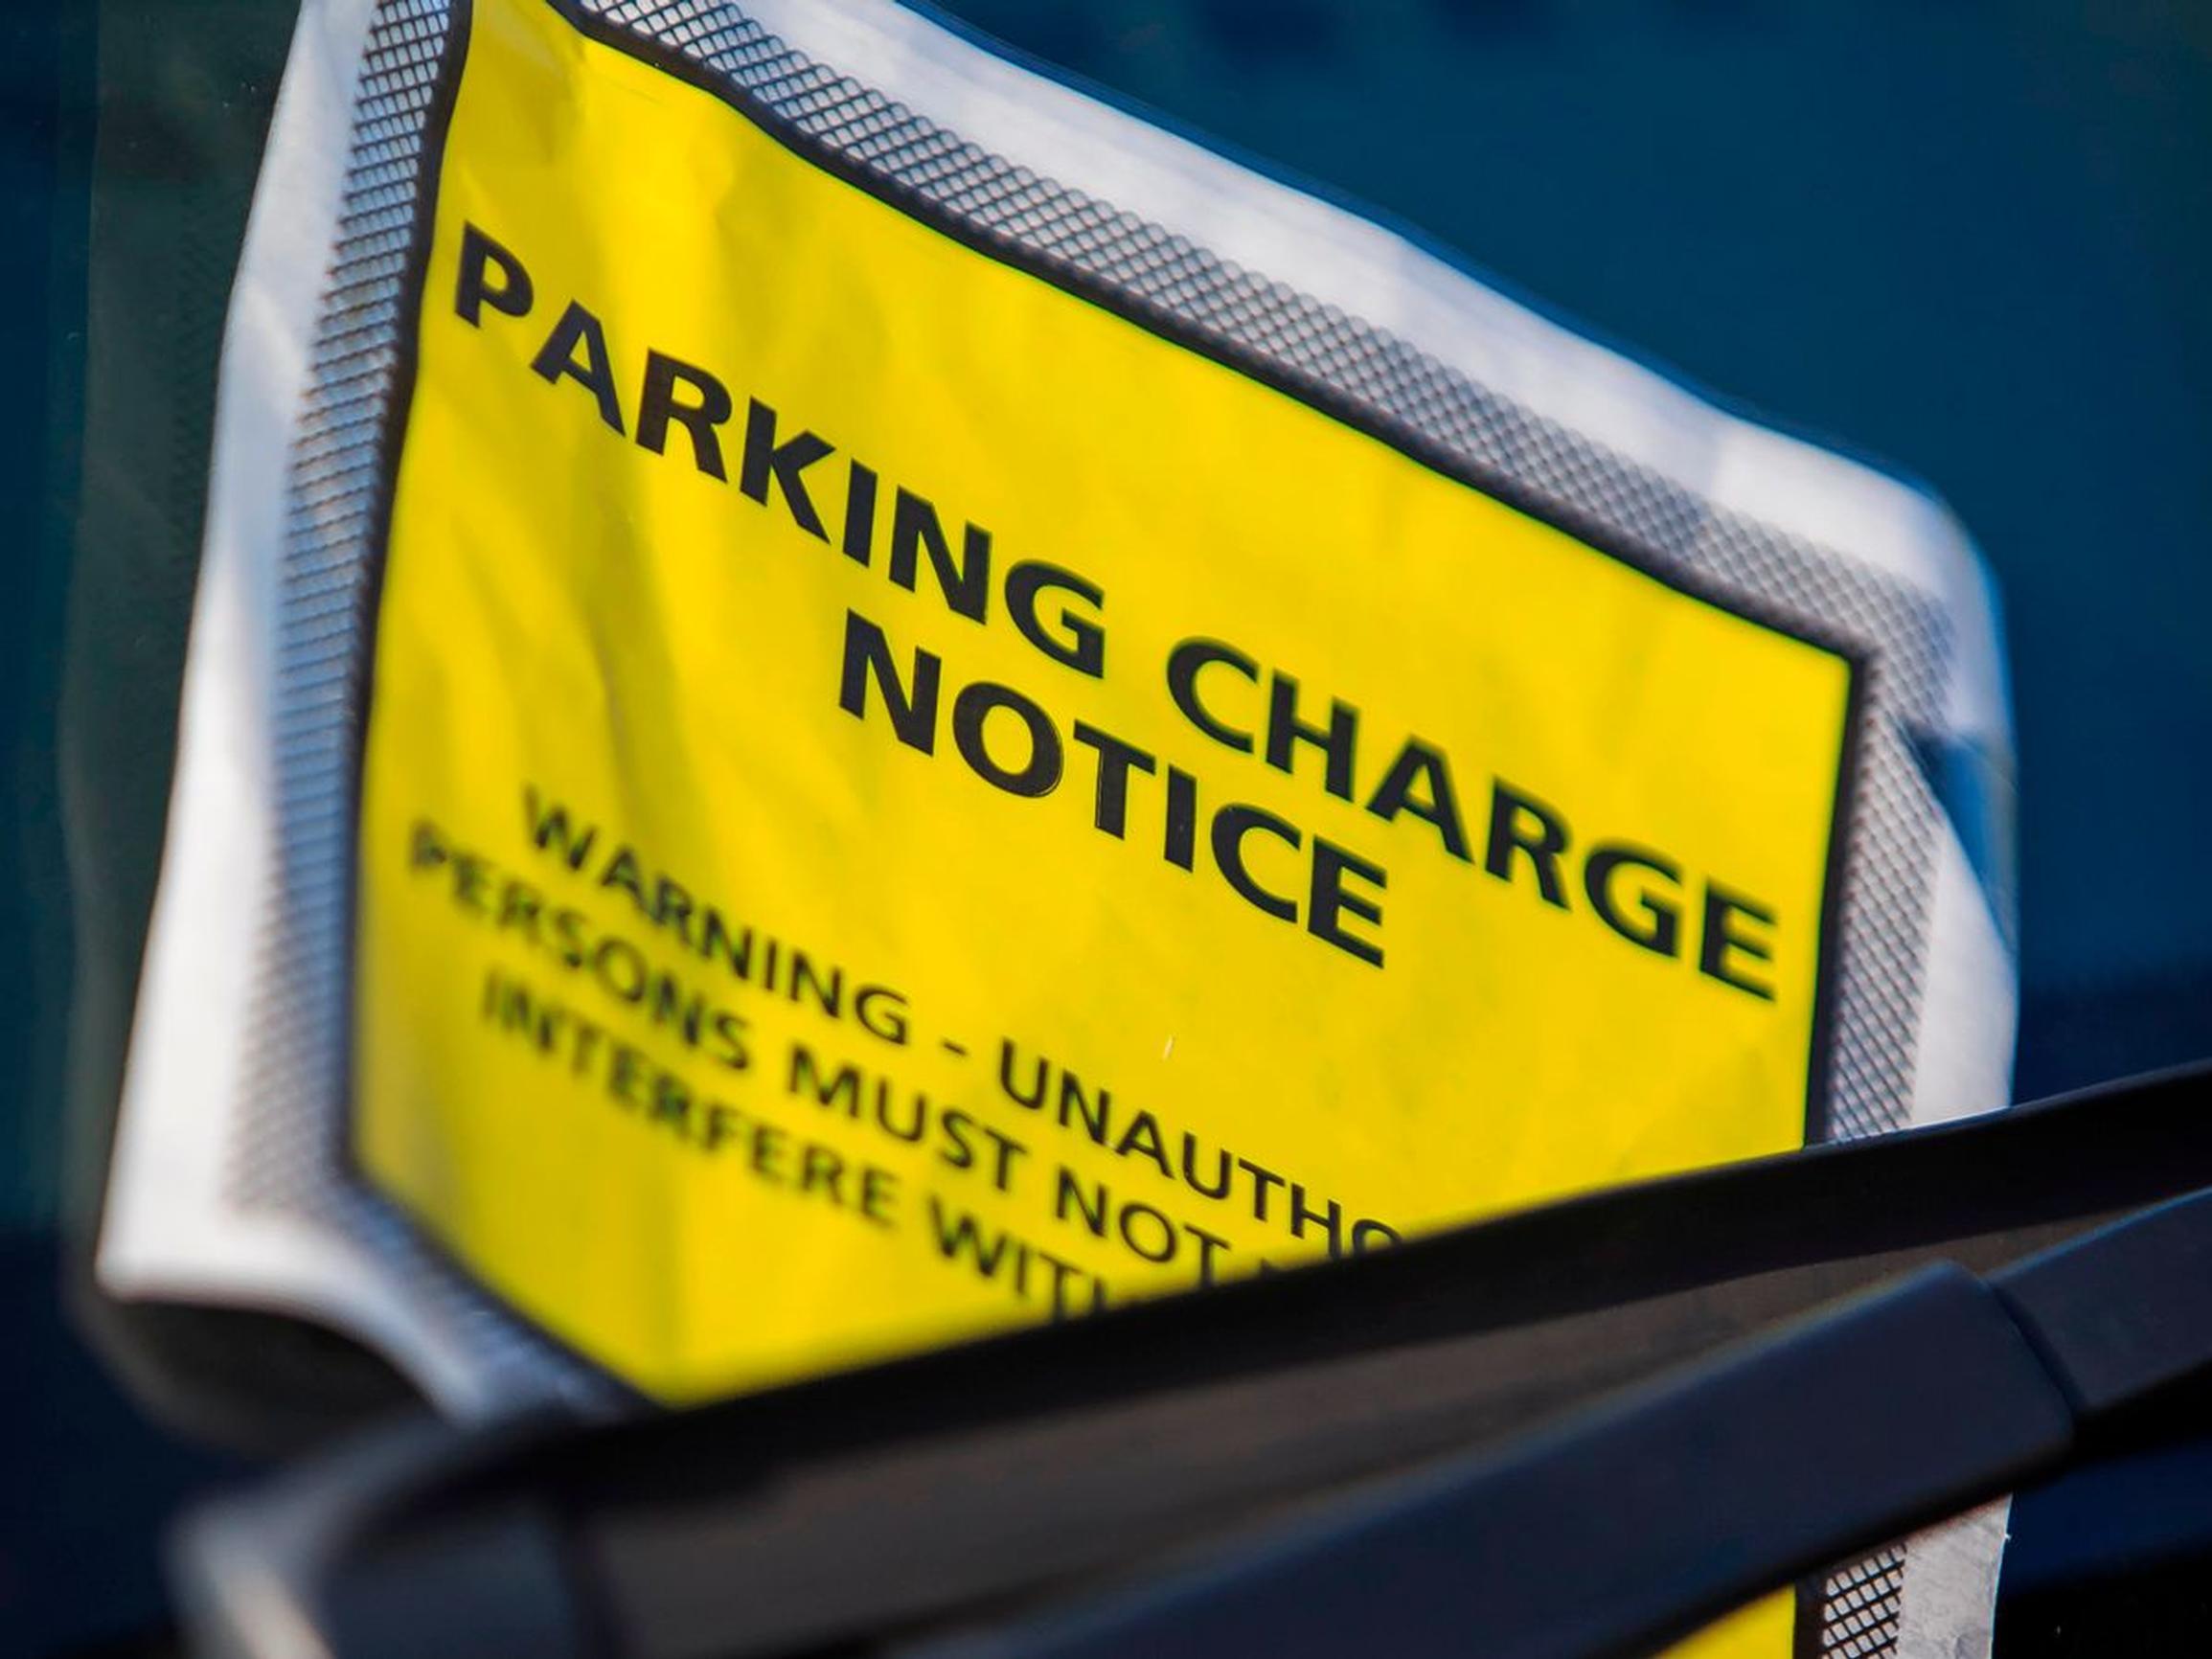 A reduction in the cost of parking charge notices dismayed some operators, who decided to launch legal challenges